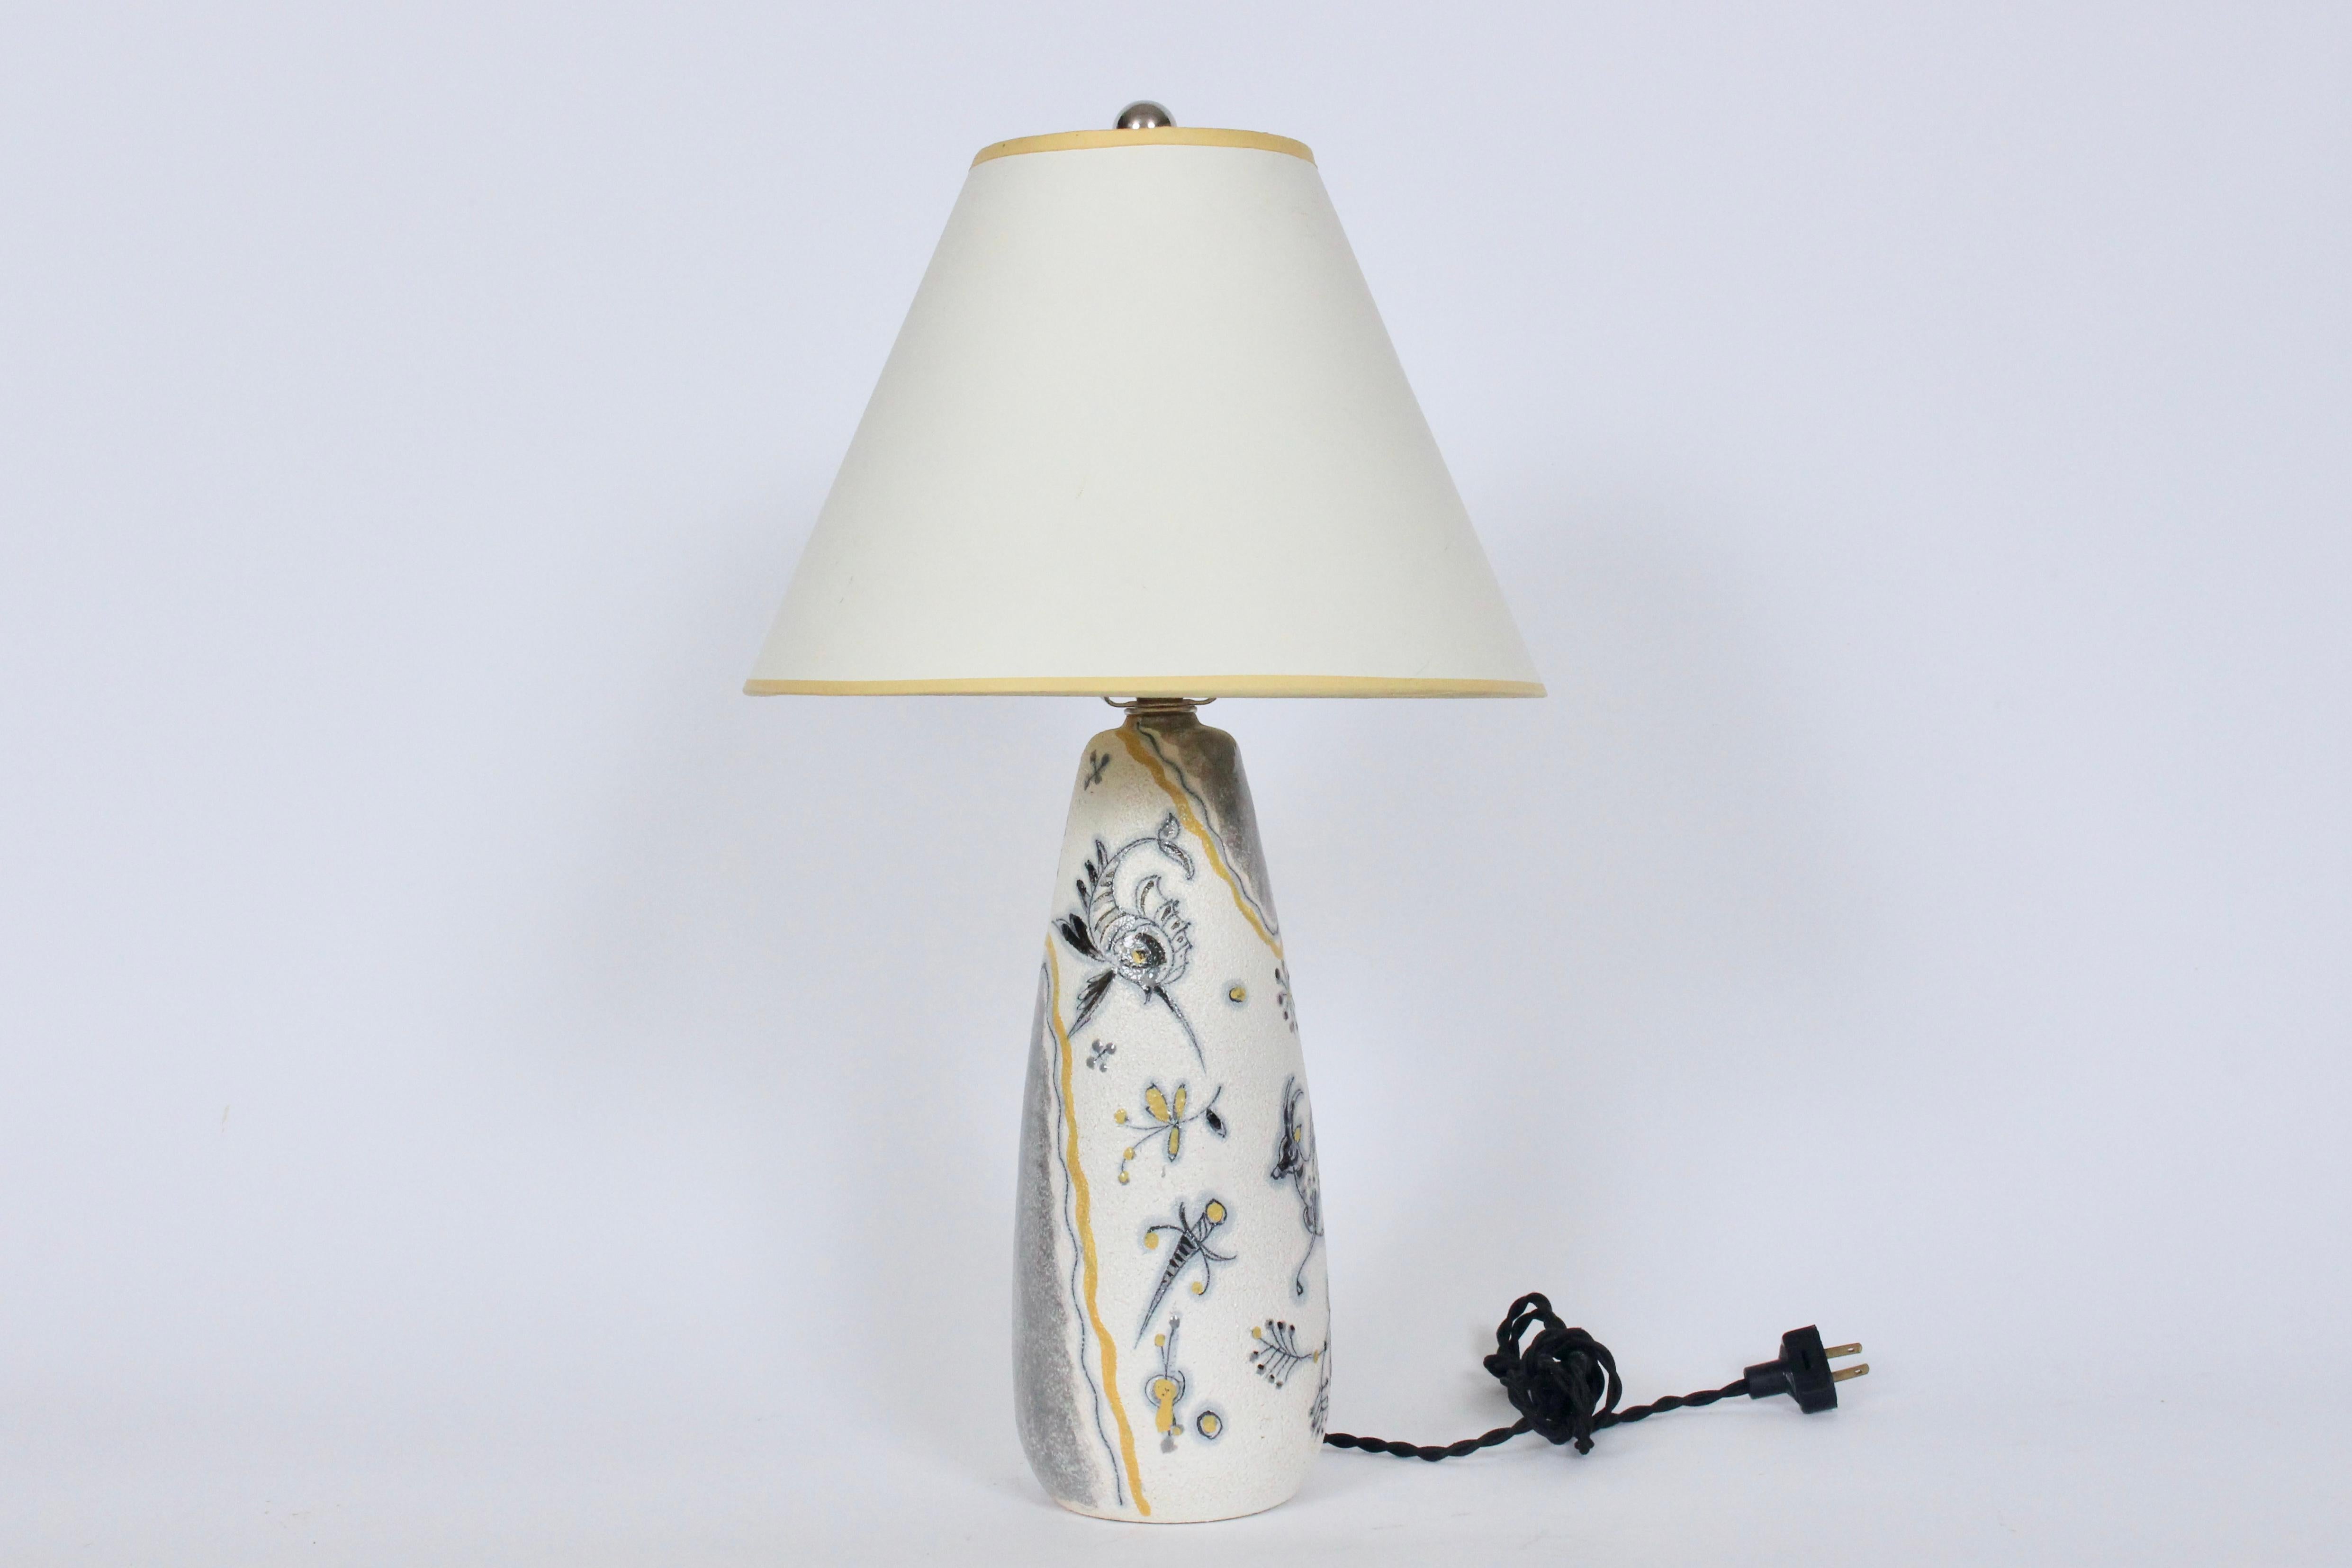 Fratelli Fanciullacci white, yellow, pale gray, silver glazed art pottery table lamp. Featuring a textured, glazed bottle form with lively, fantastical hand painted designs including; gazelle, dove, dragon fly, tropical fish, lute, florals, abstract